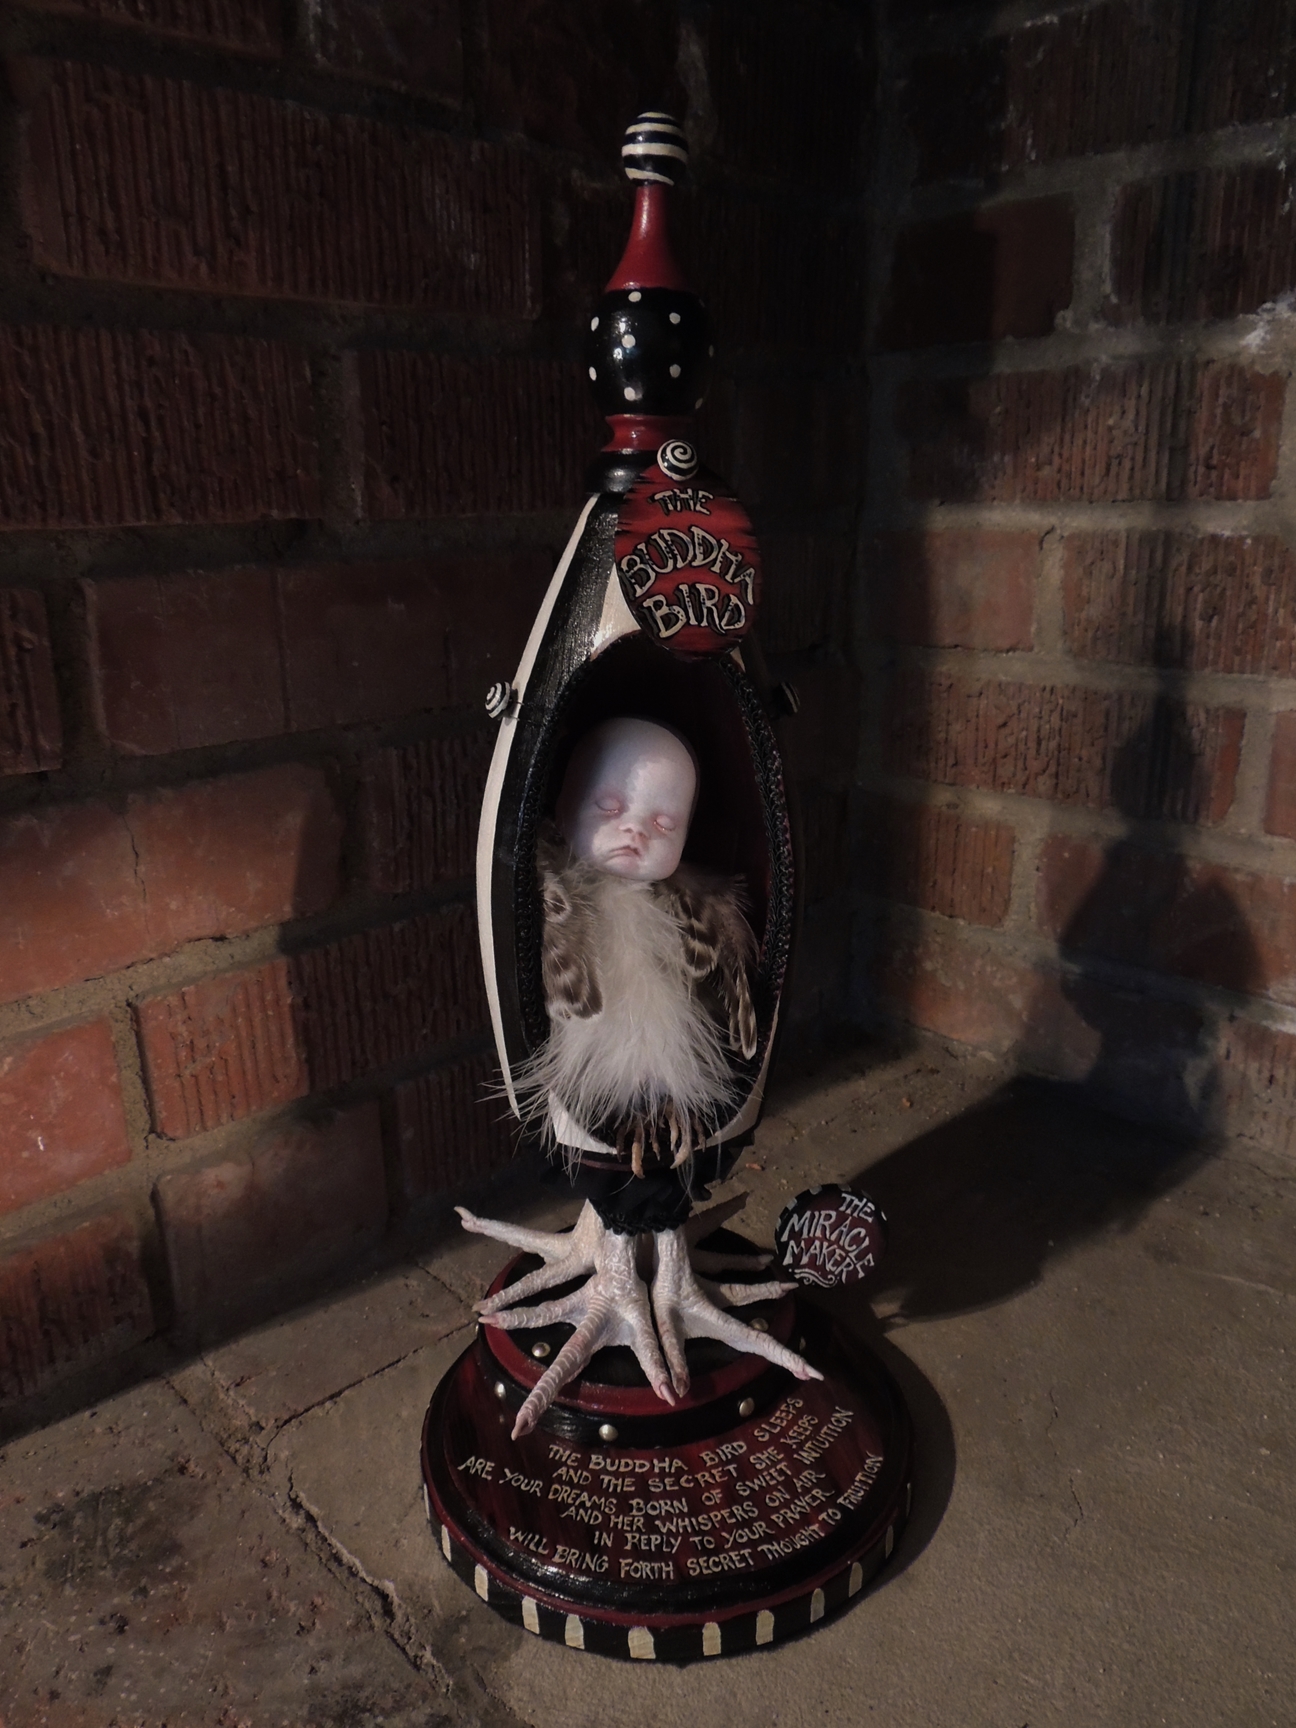 sleeping baby doll with feathered bird body in an egg shaped containter with taxidermy bird feet standing on red and black hand-painted wooden platform with lettered verse